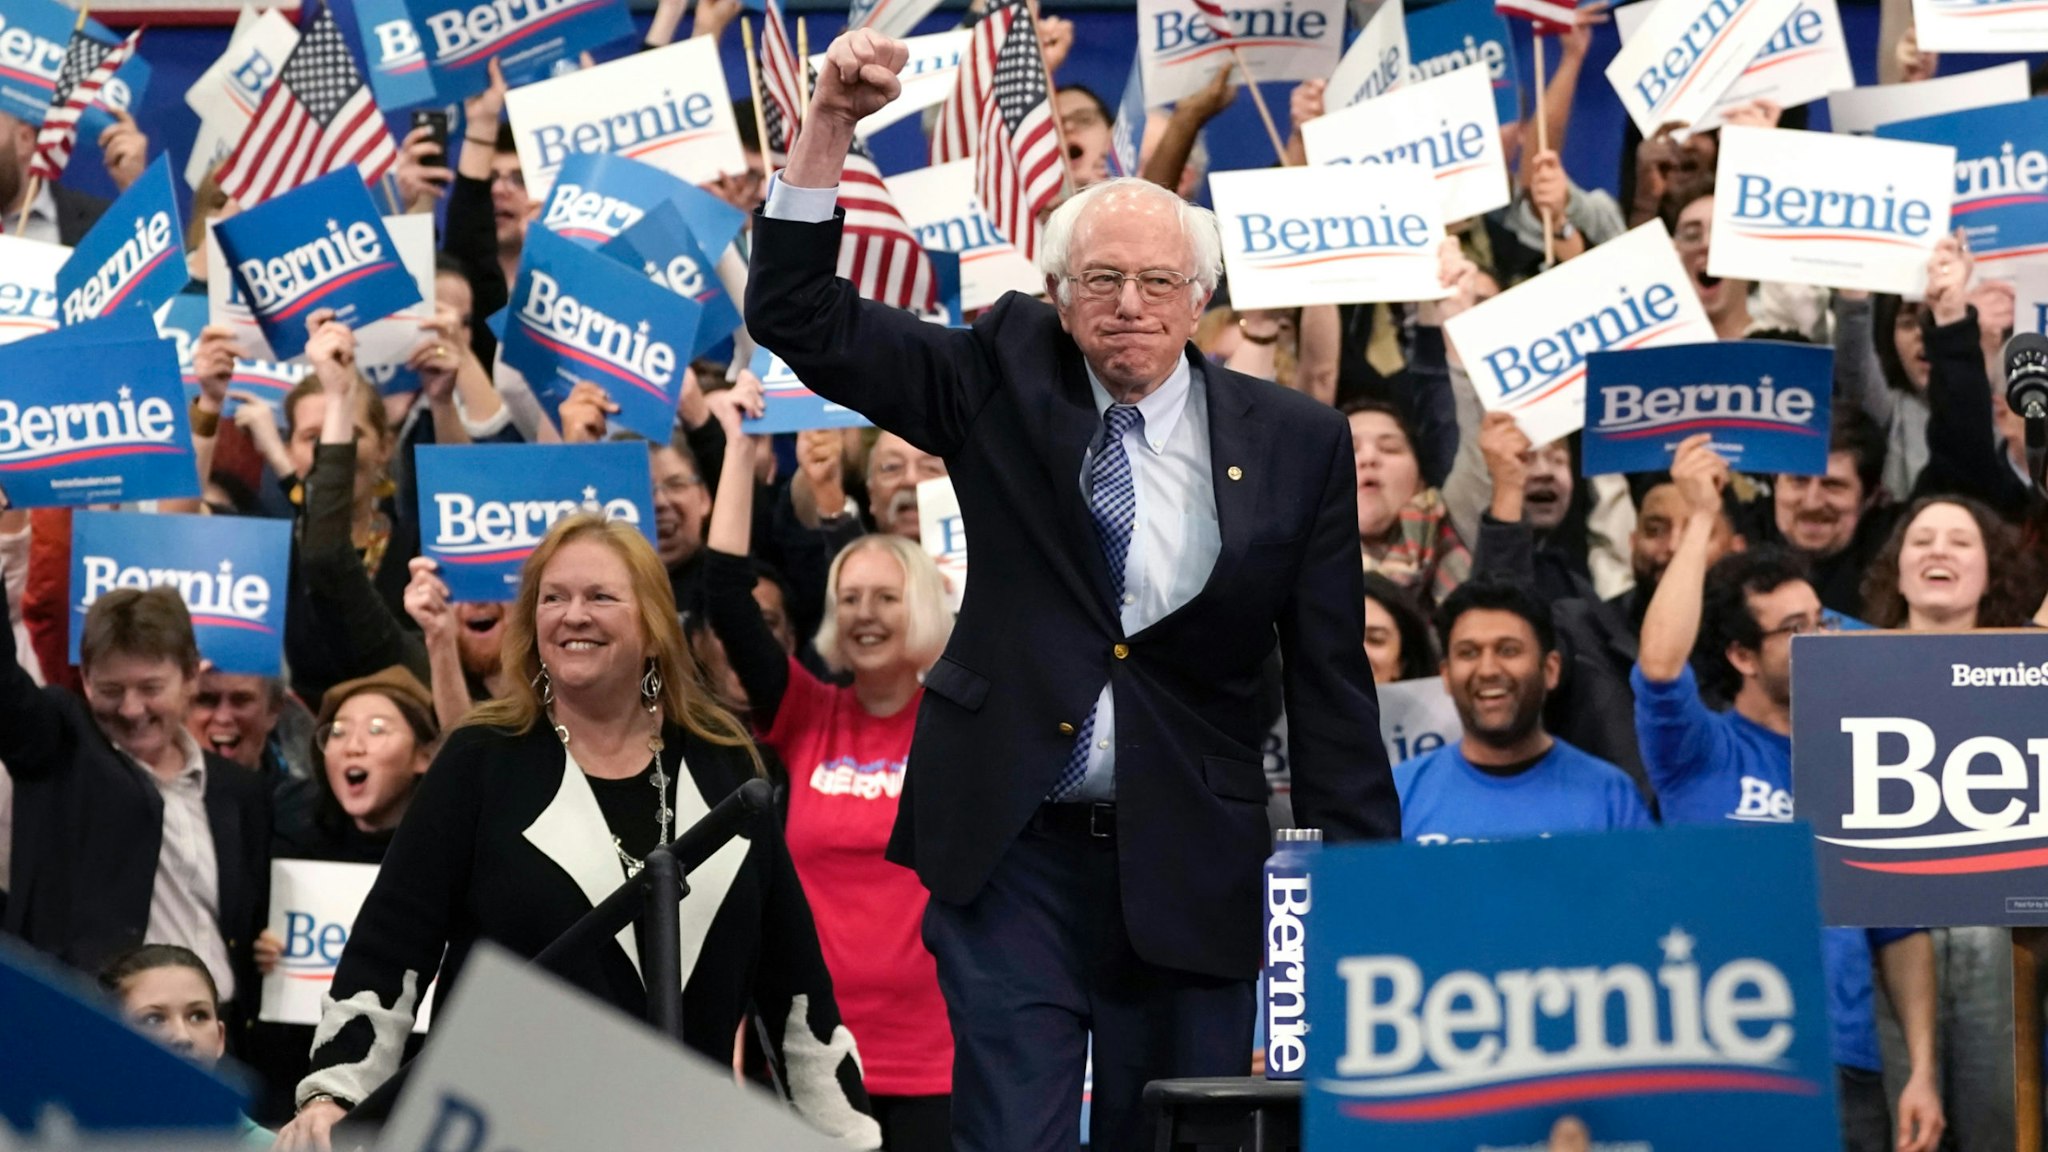 Democratic presidential candidate Sen. Bernie Sanders (I-VT) takes the stage during a primary night event on February 11, 2020 in Manchester, New Hampshire.